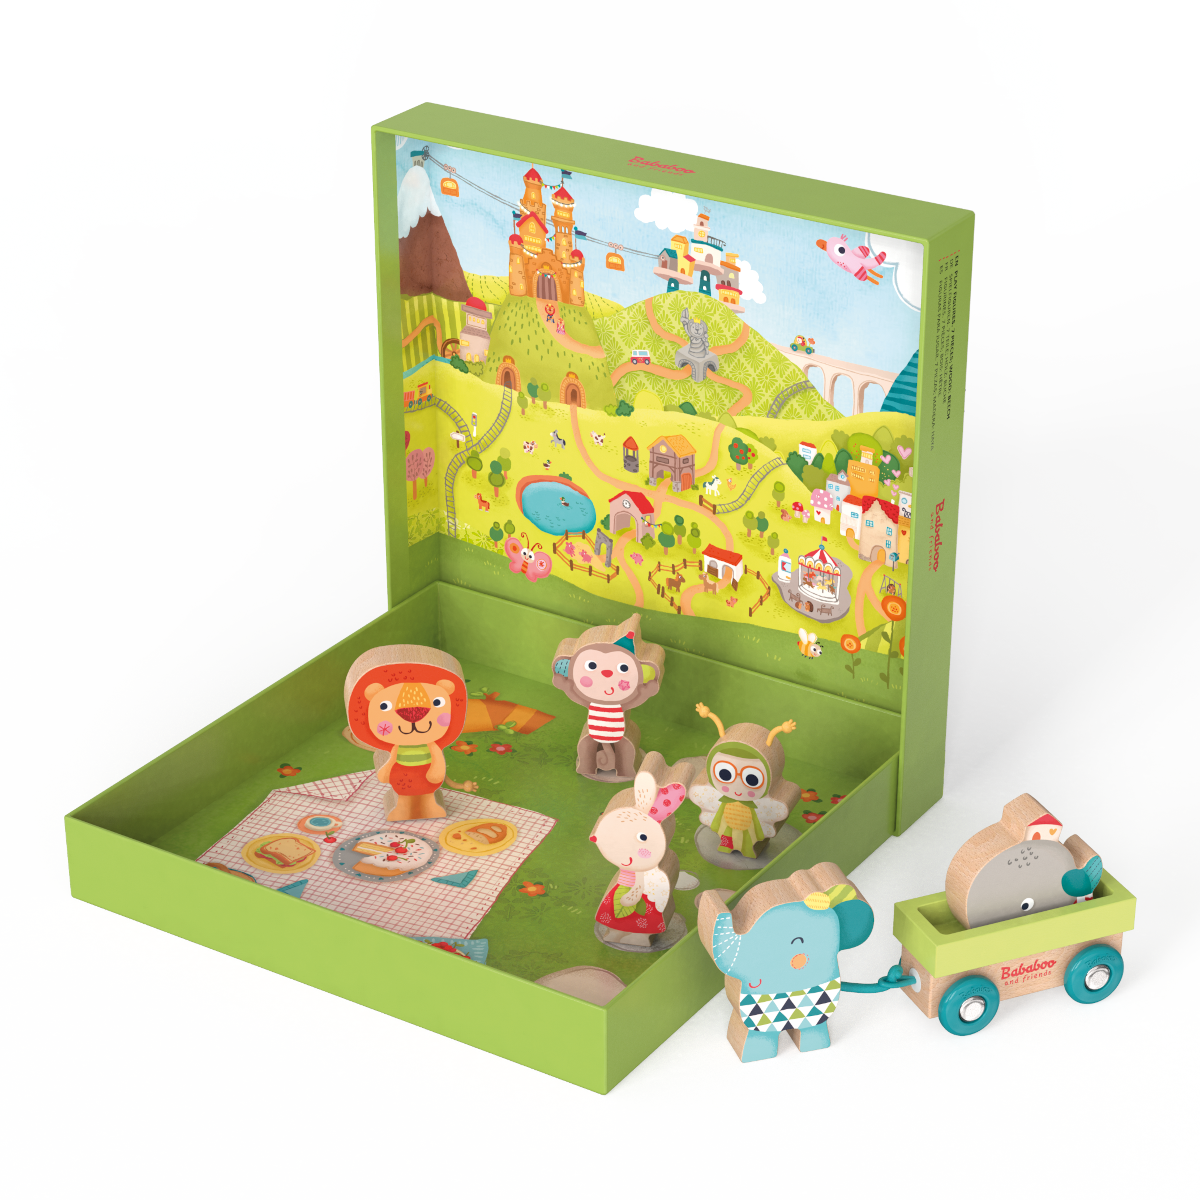 Bababoo and friends Play Figures shown with packaging